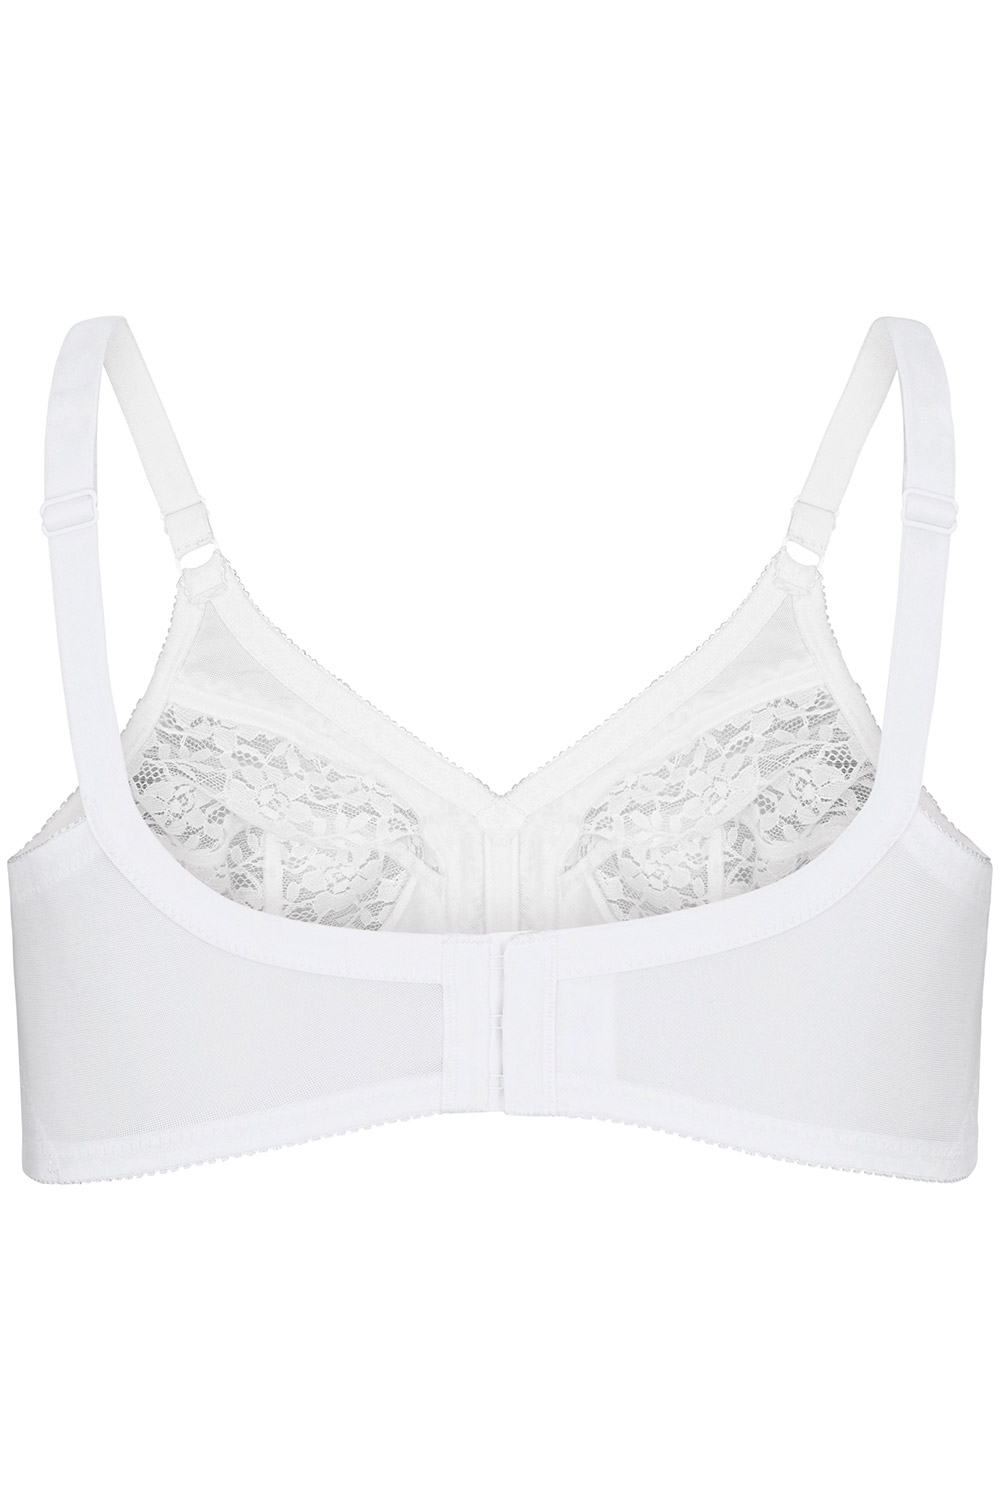 Buy Lace Cup Non Wired Control Bra | Bonmarché